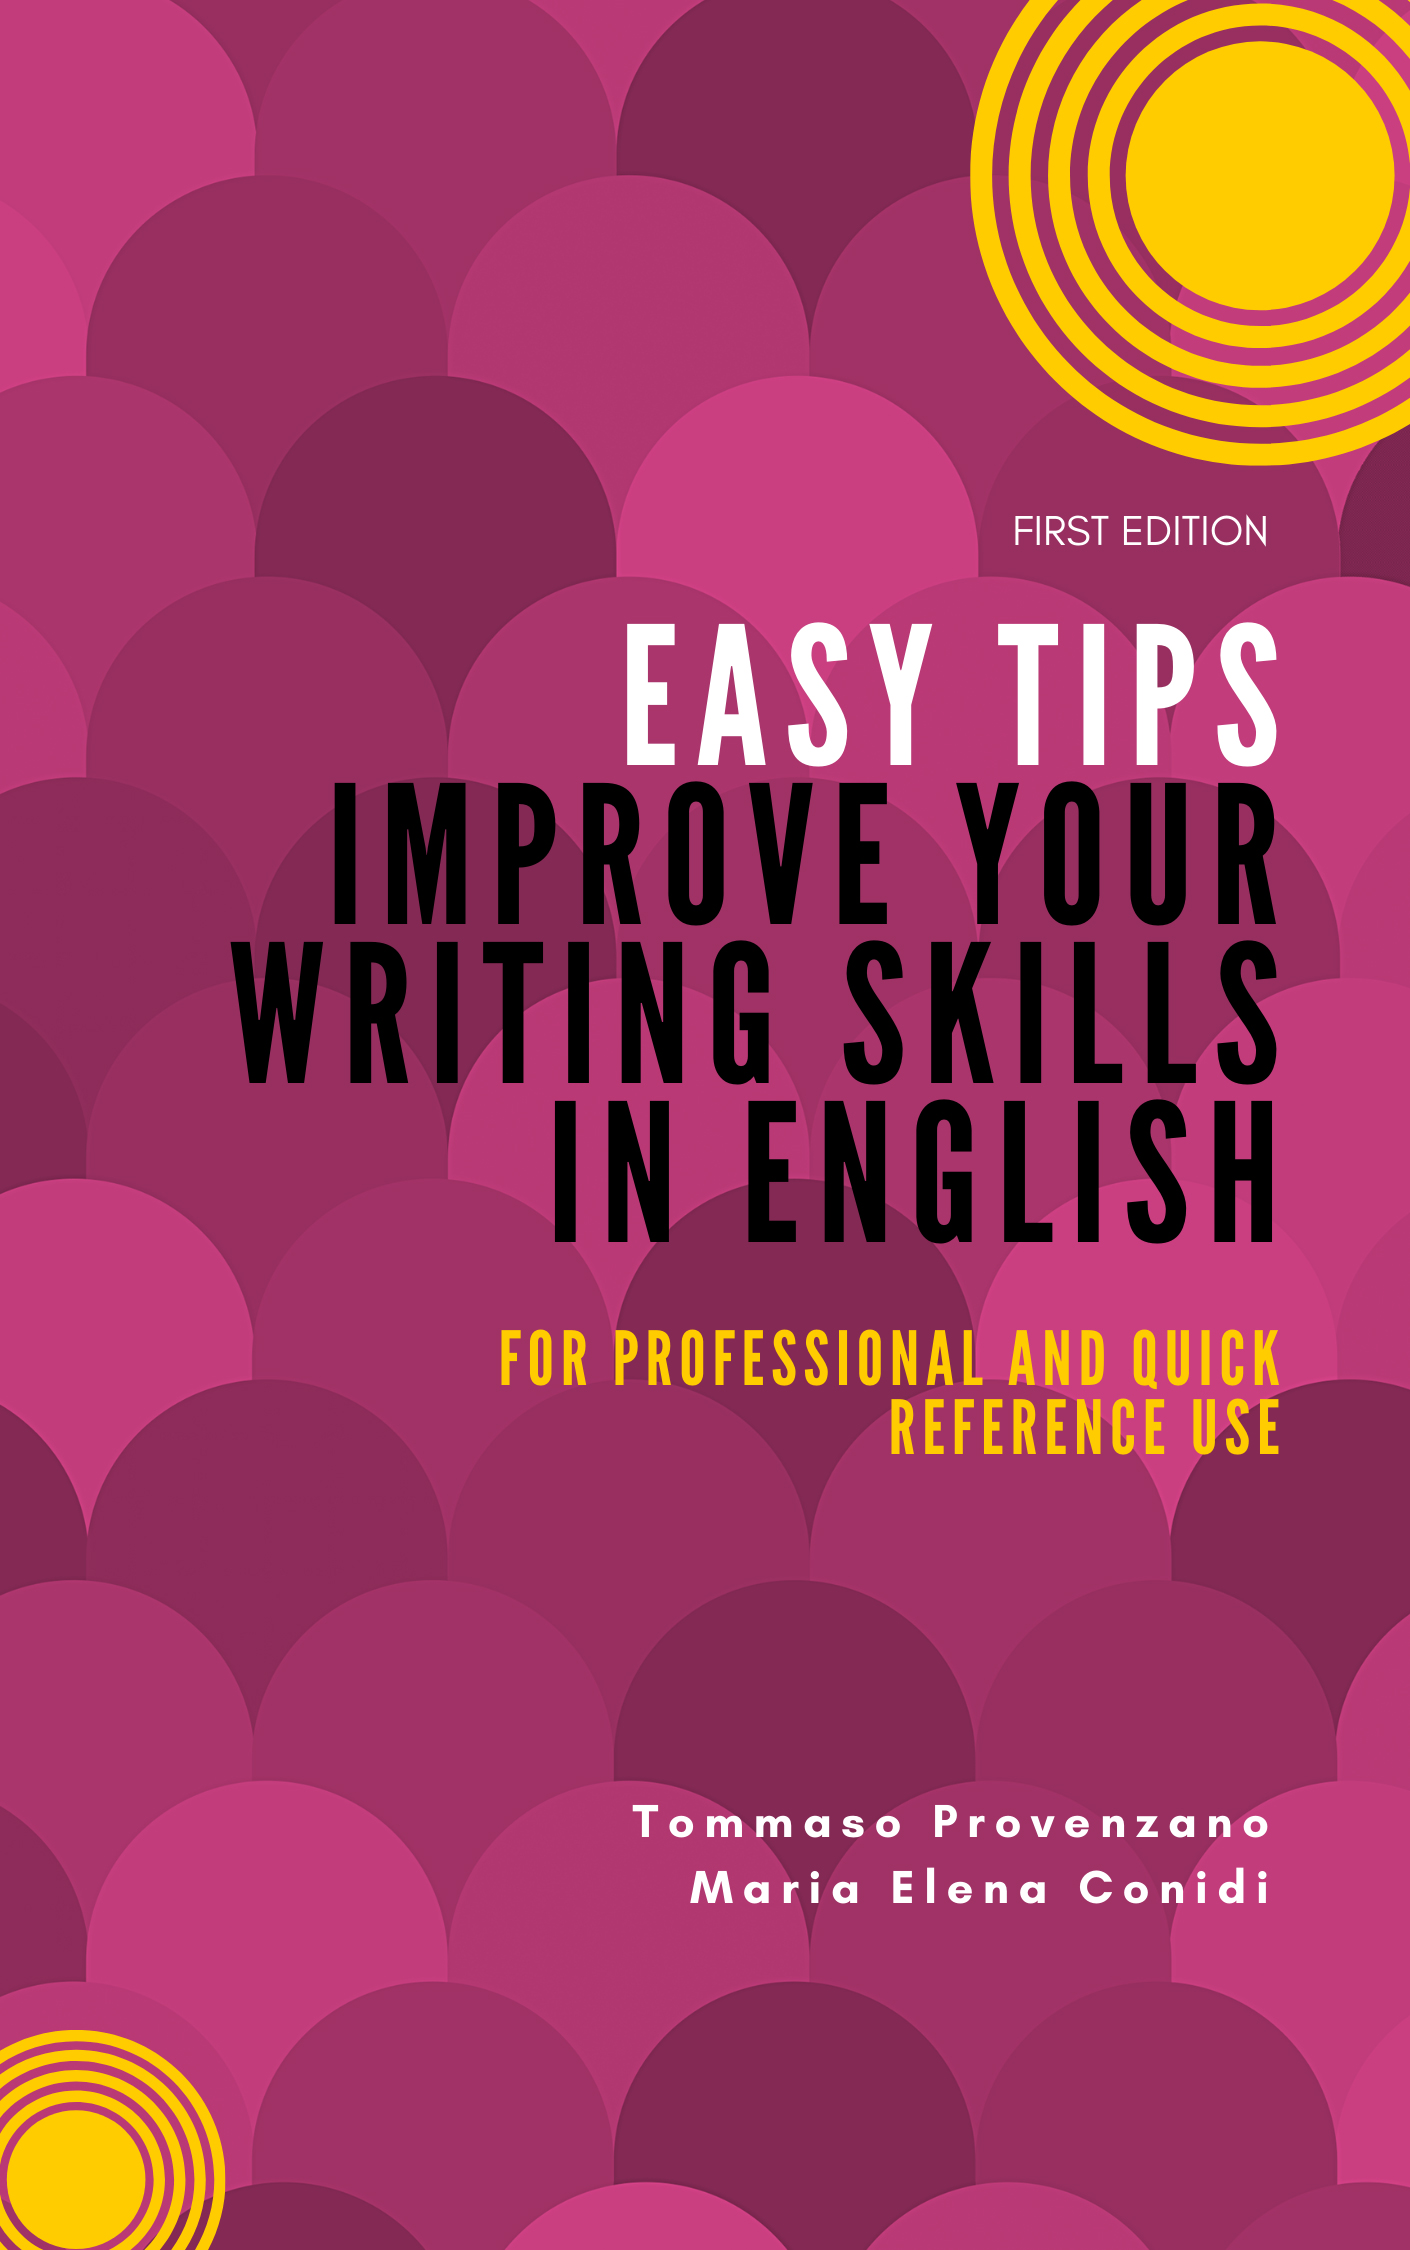 How To Improve Professional Writing Skills